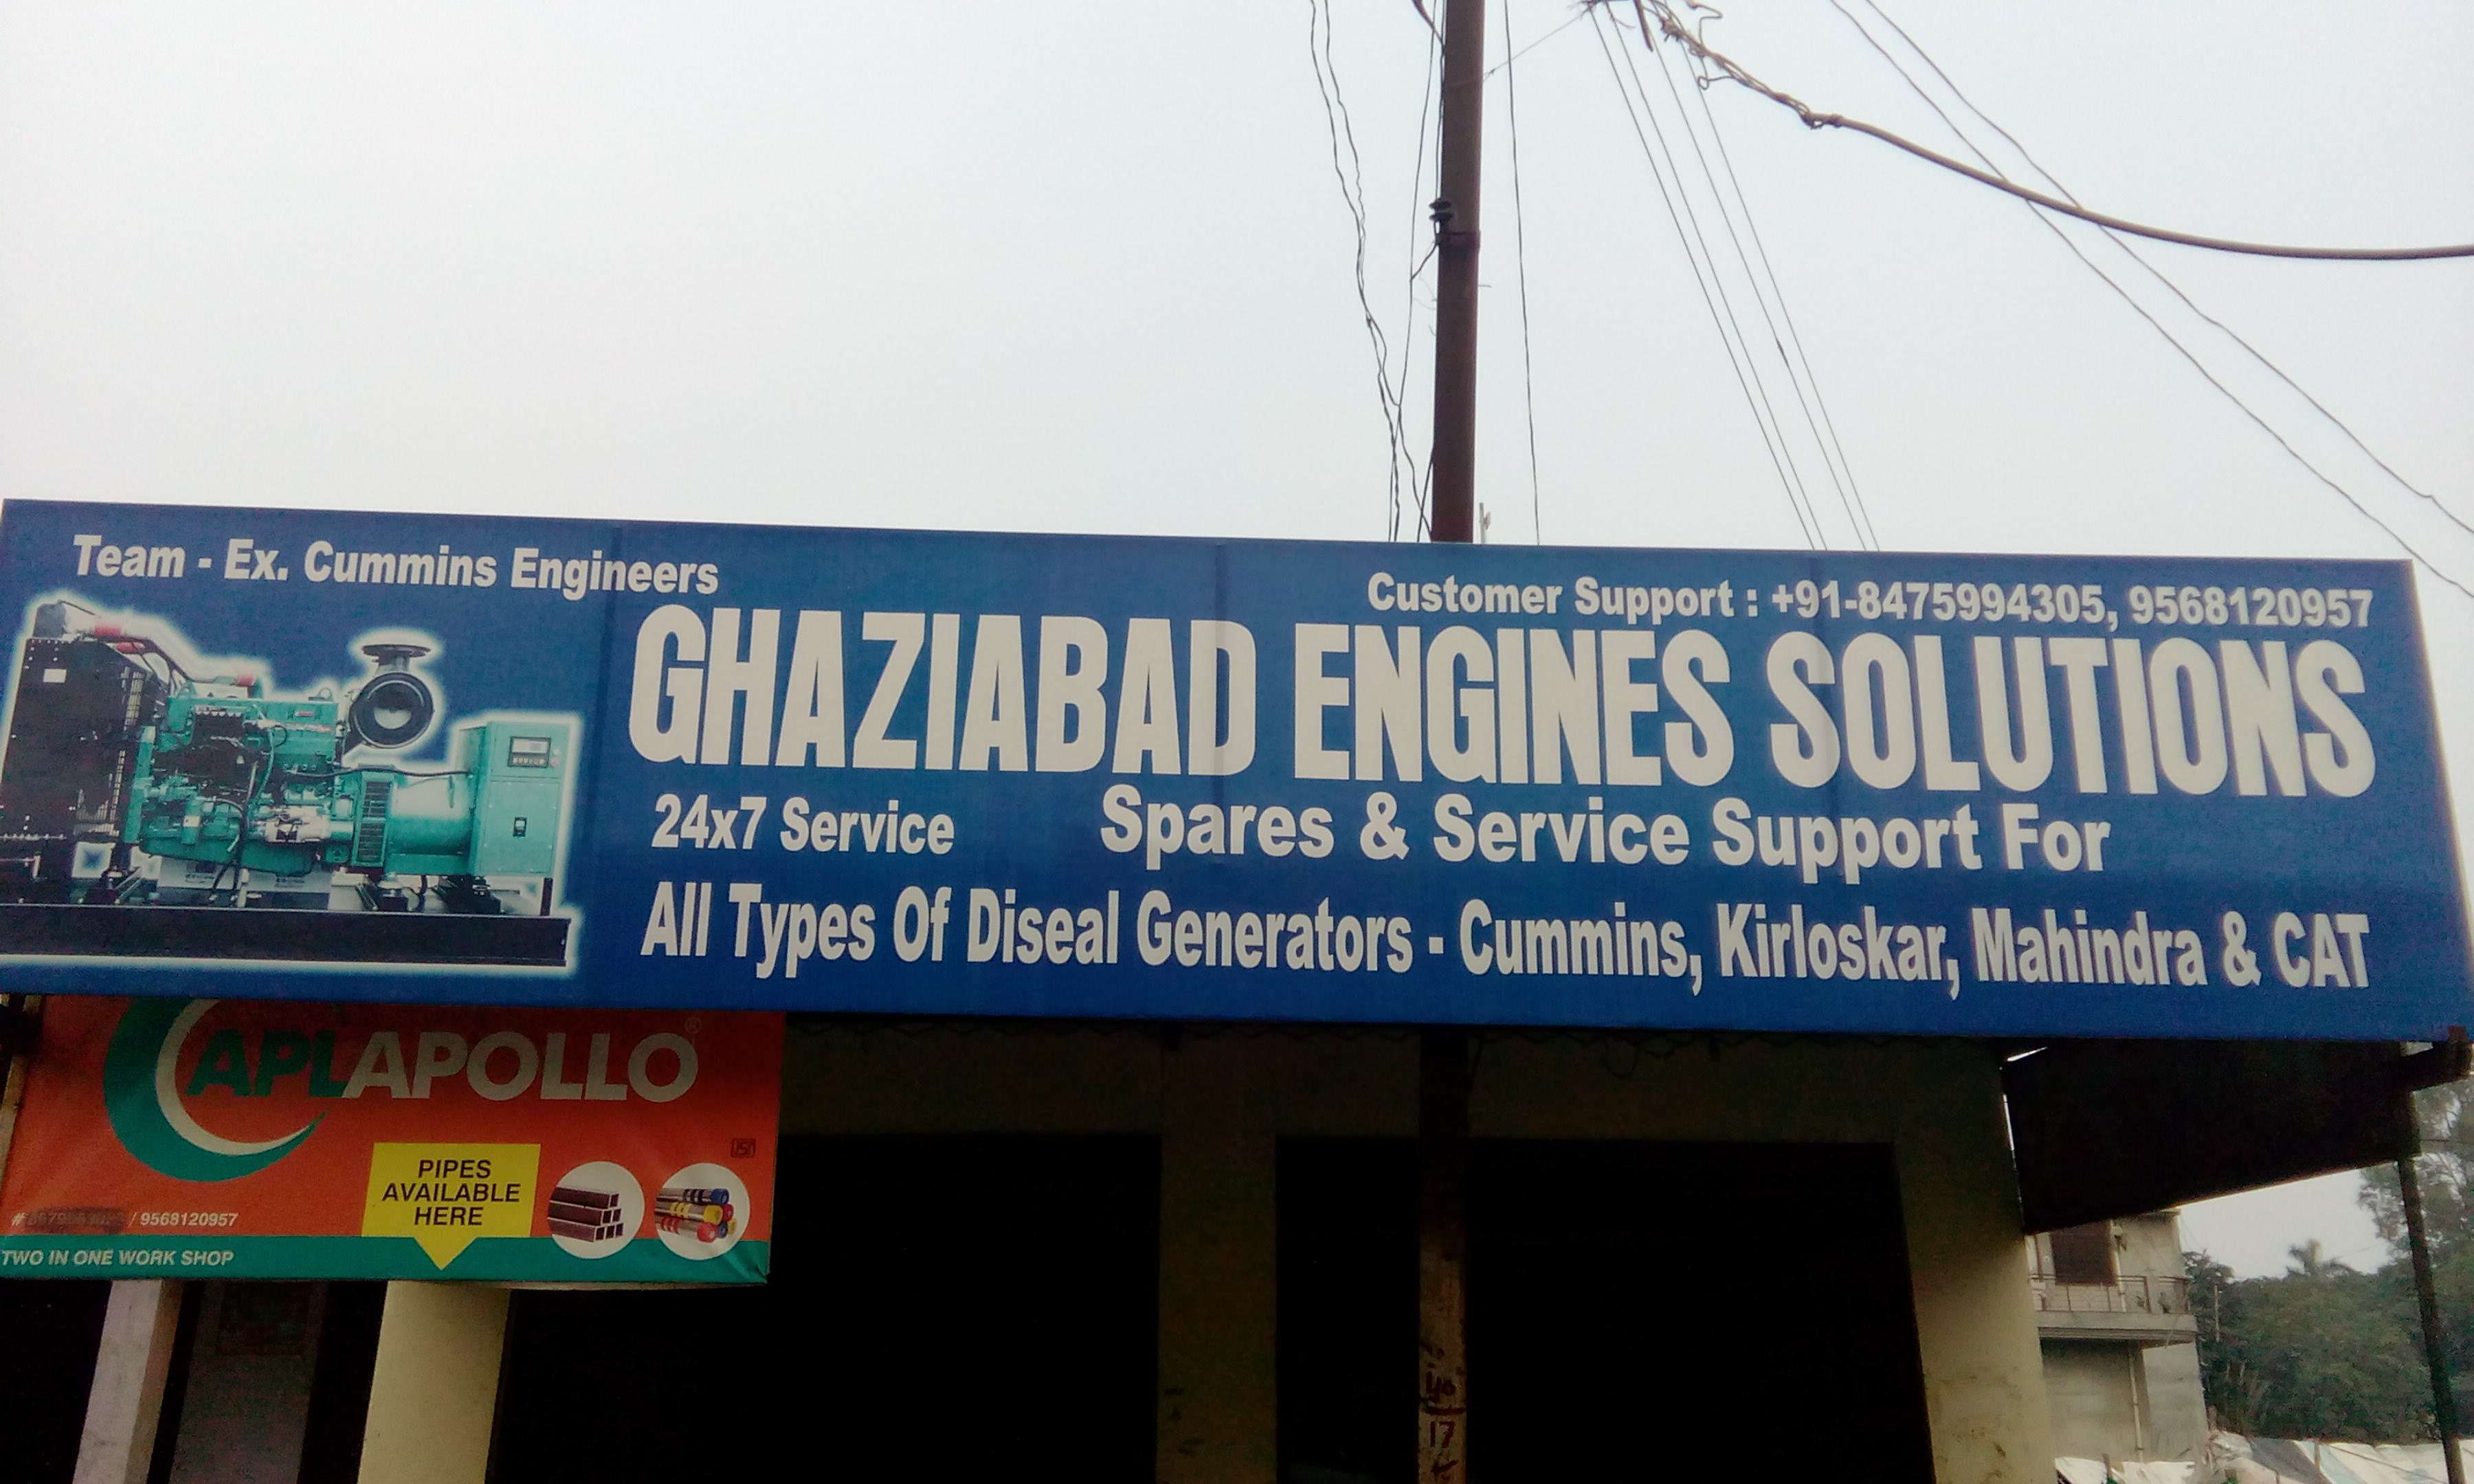 Ghaziabad Engines Solutions